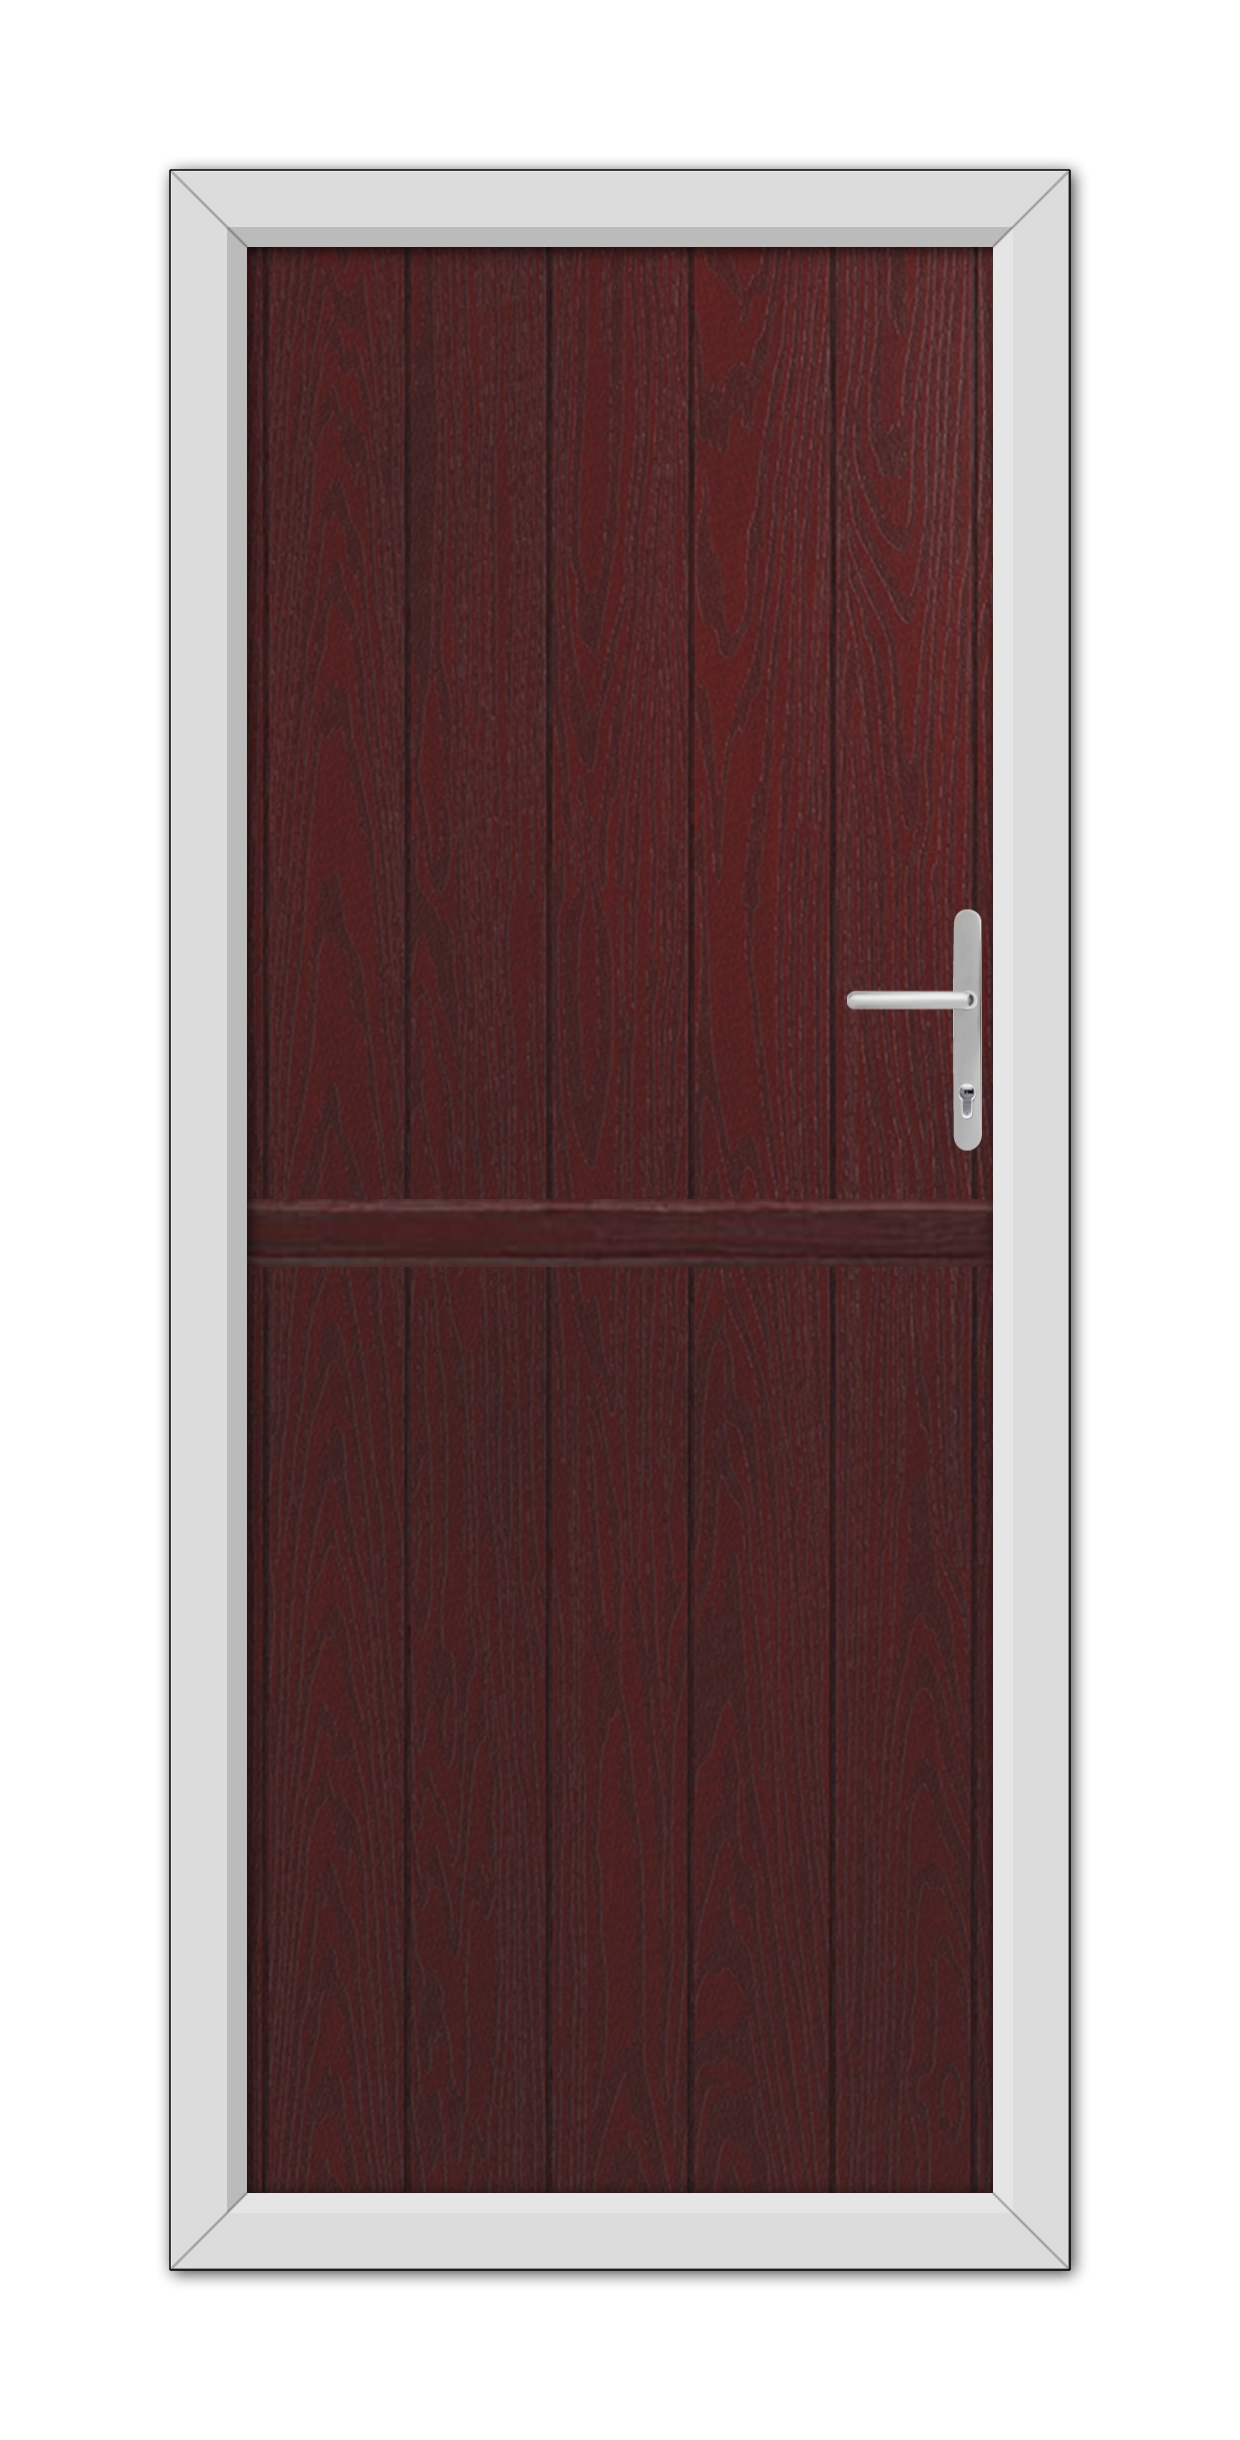 A modern Rosewood Norfolk solid stable composite door with a silver handle, set within a light gray frame.